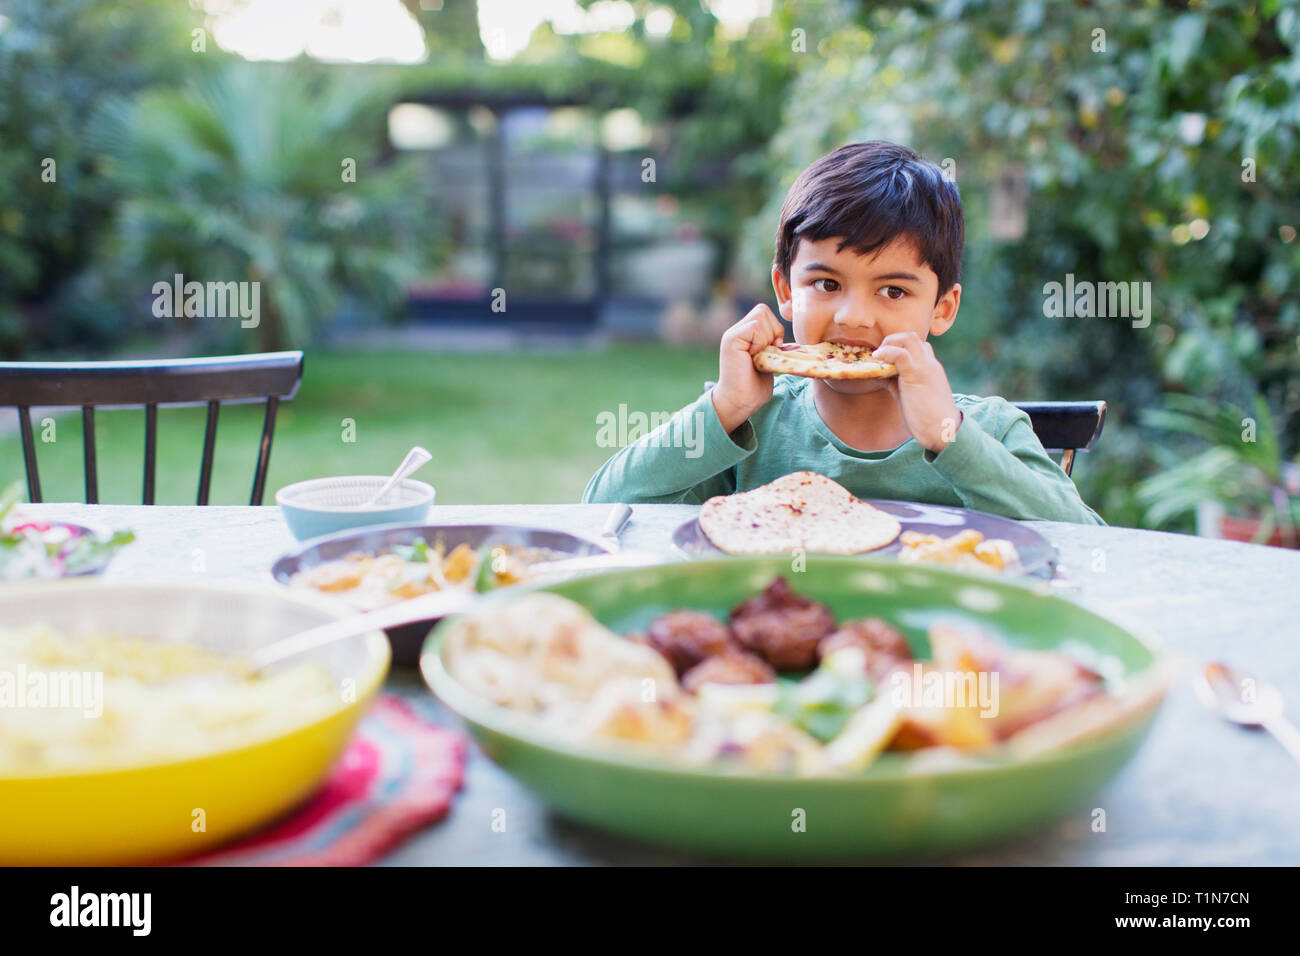 Boy eating naan bread at dinner table Stock Photo